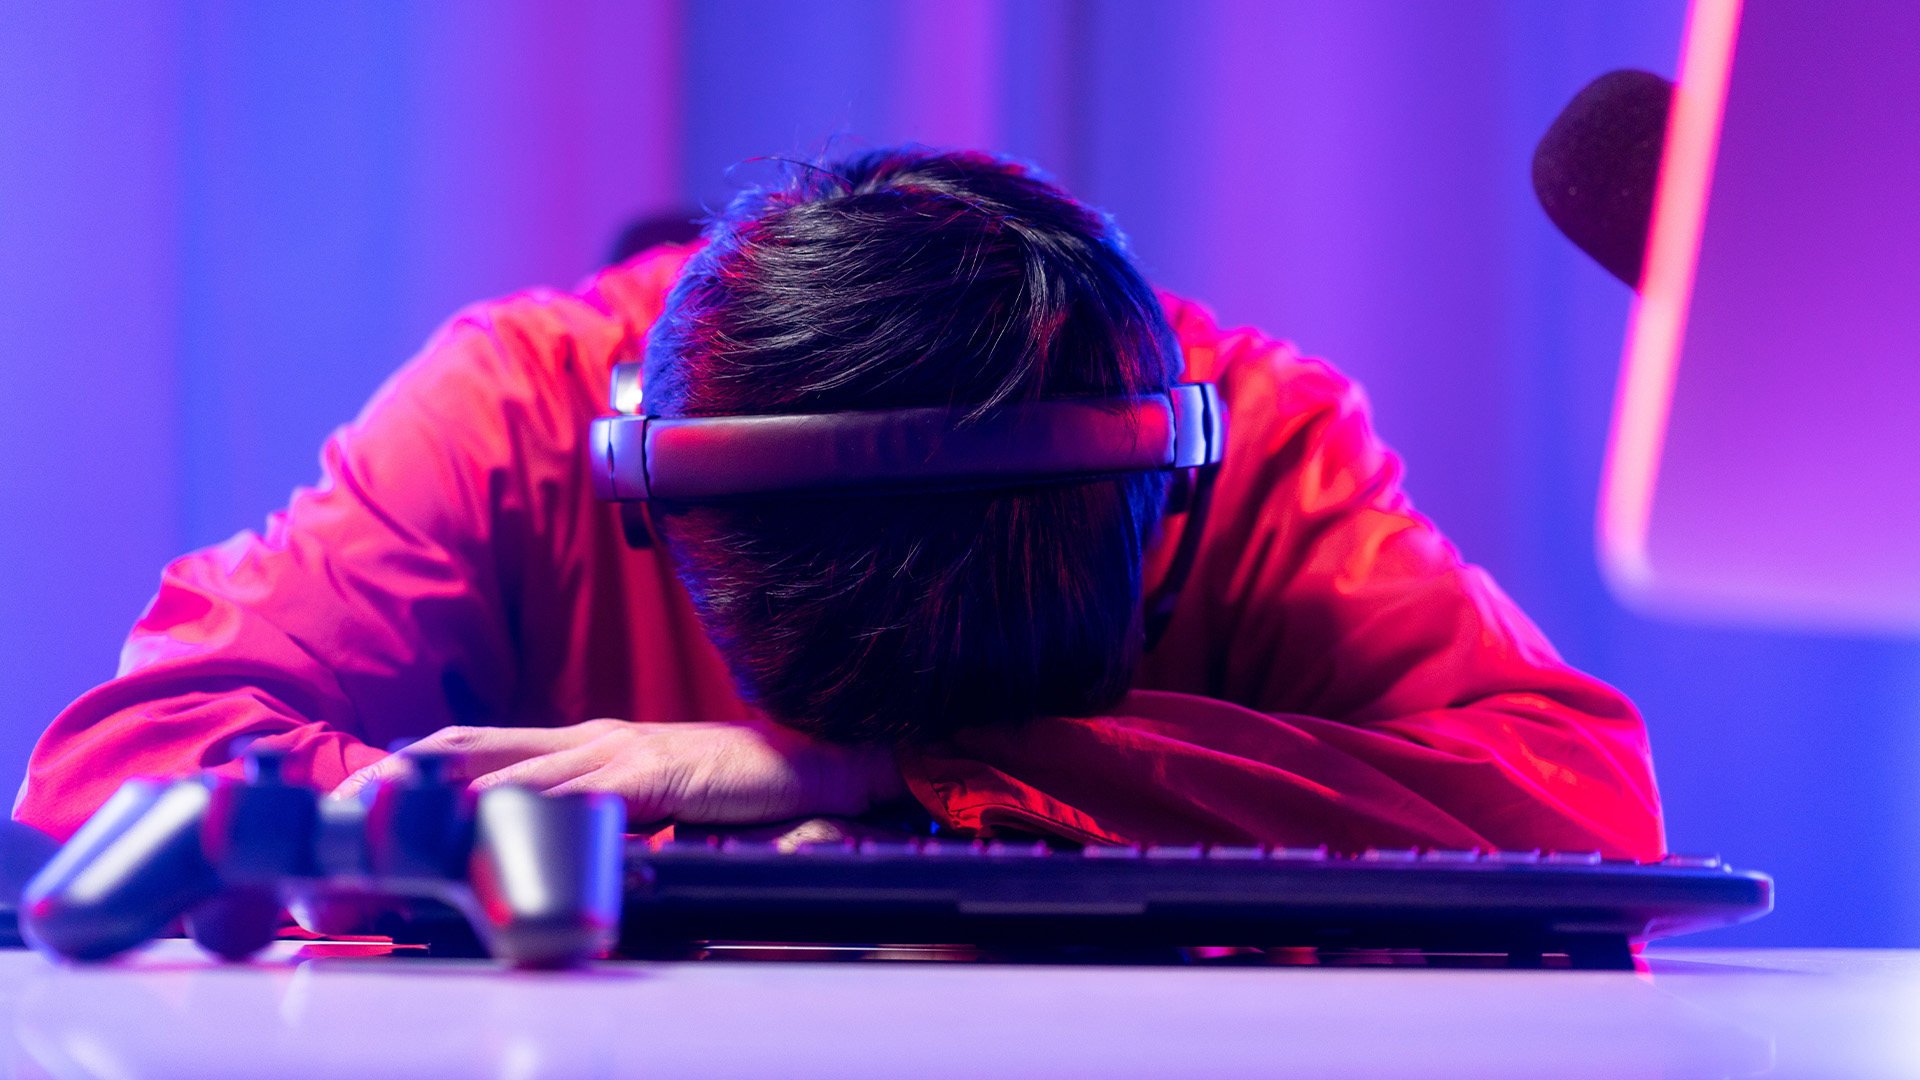 A man visited an internet café in eastern China for a long gaming session in June, workers assumed he had fallen asleep, not realising he had passed away for 30 hours. Photo: Shutterstock
